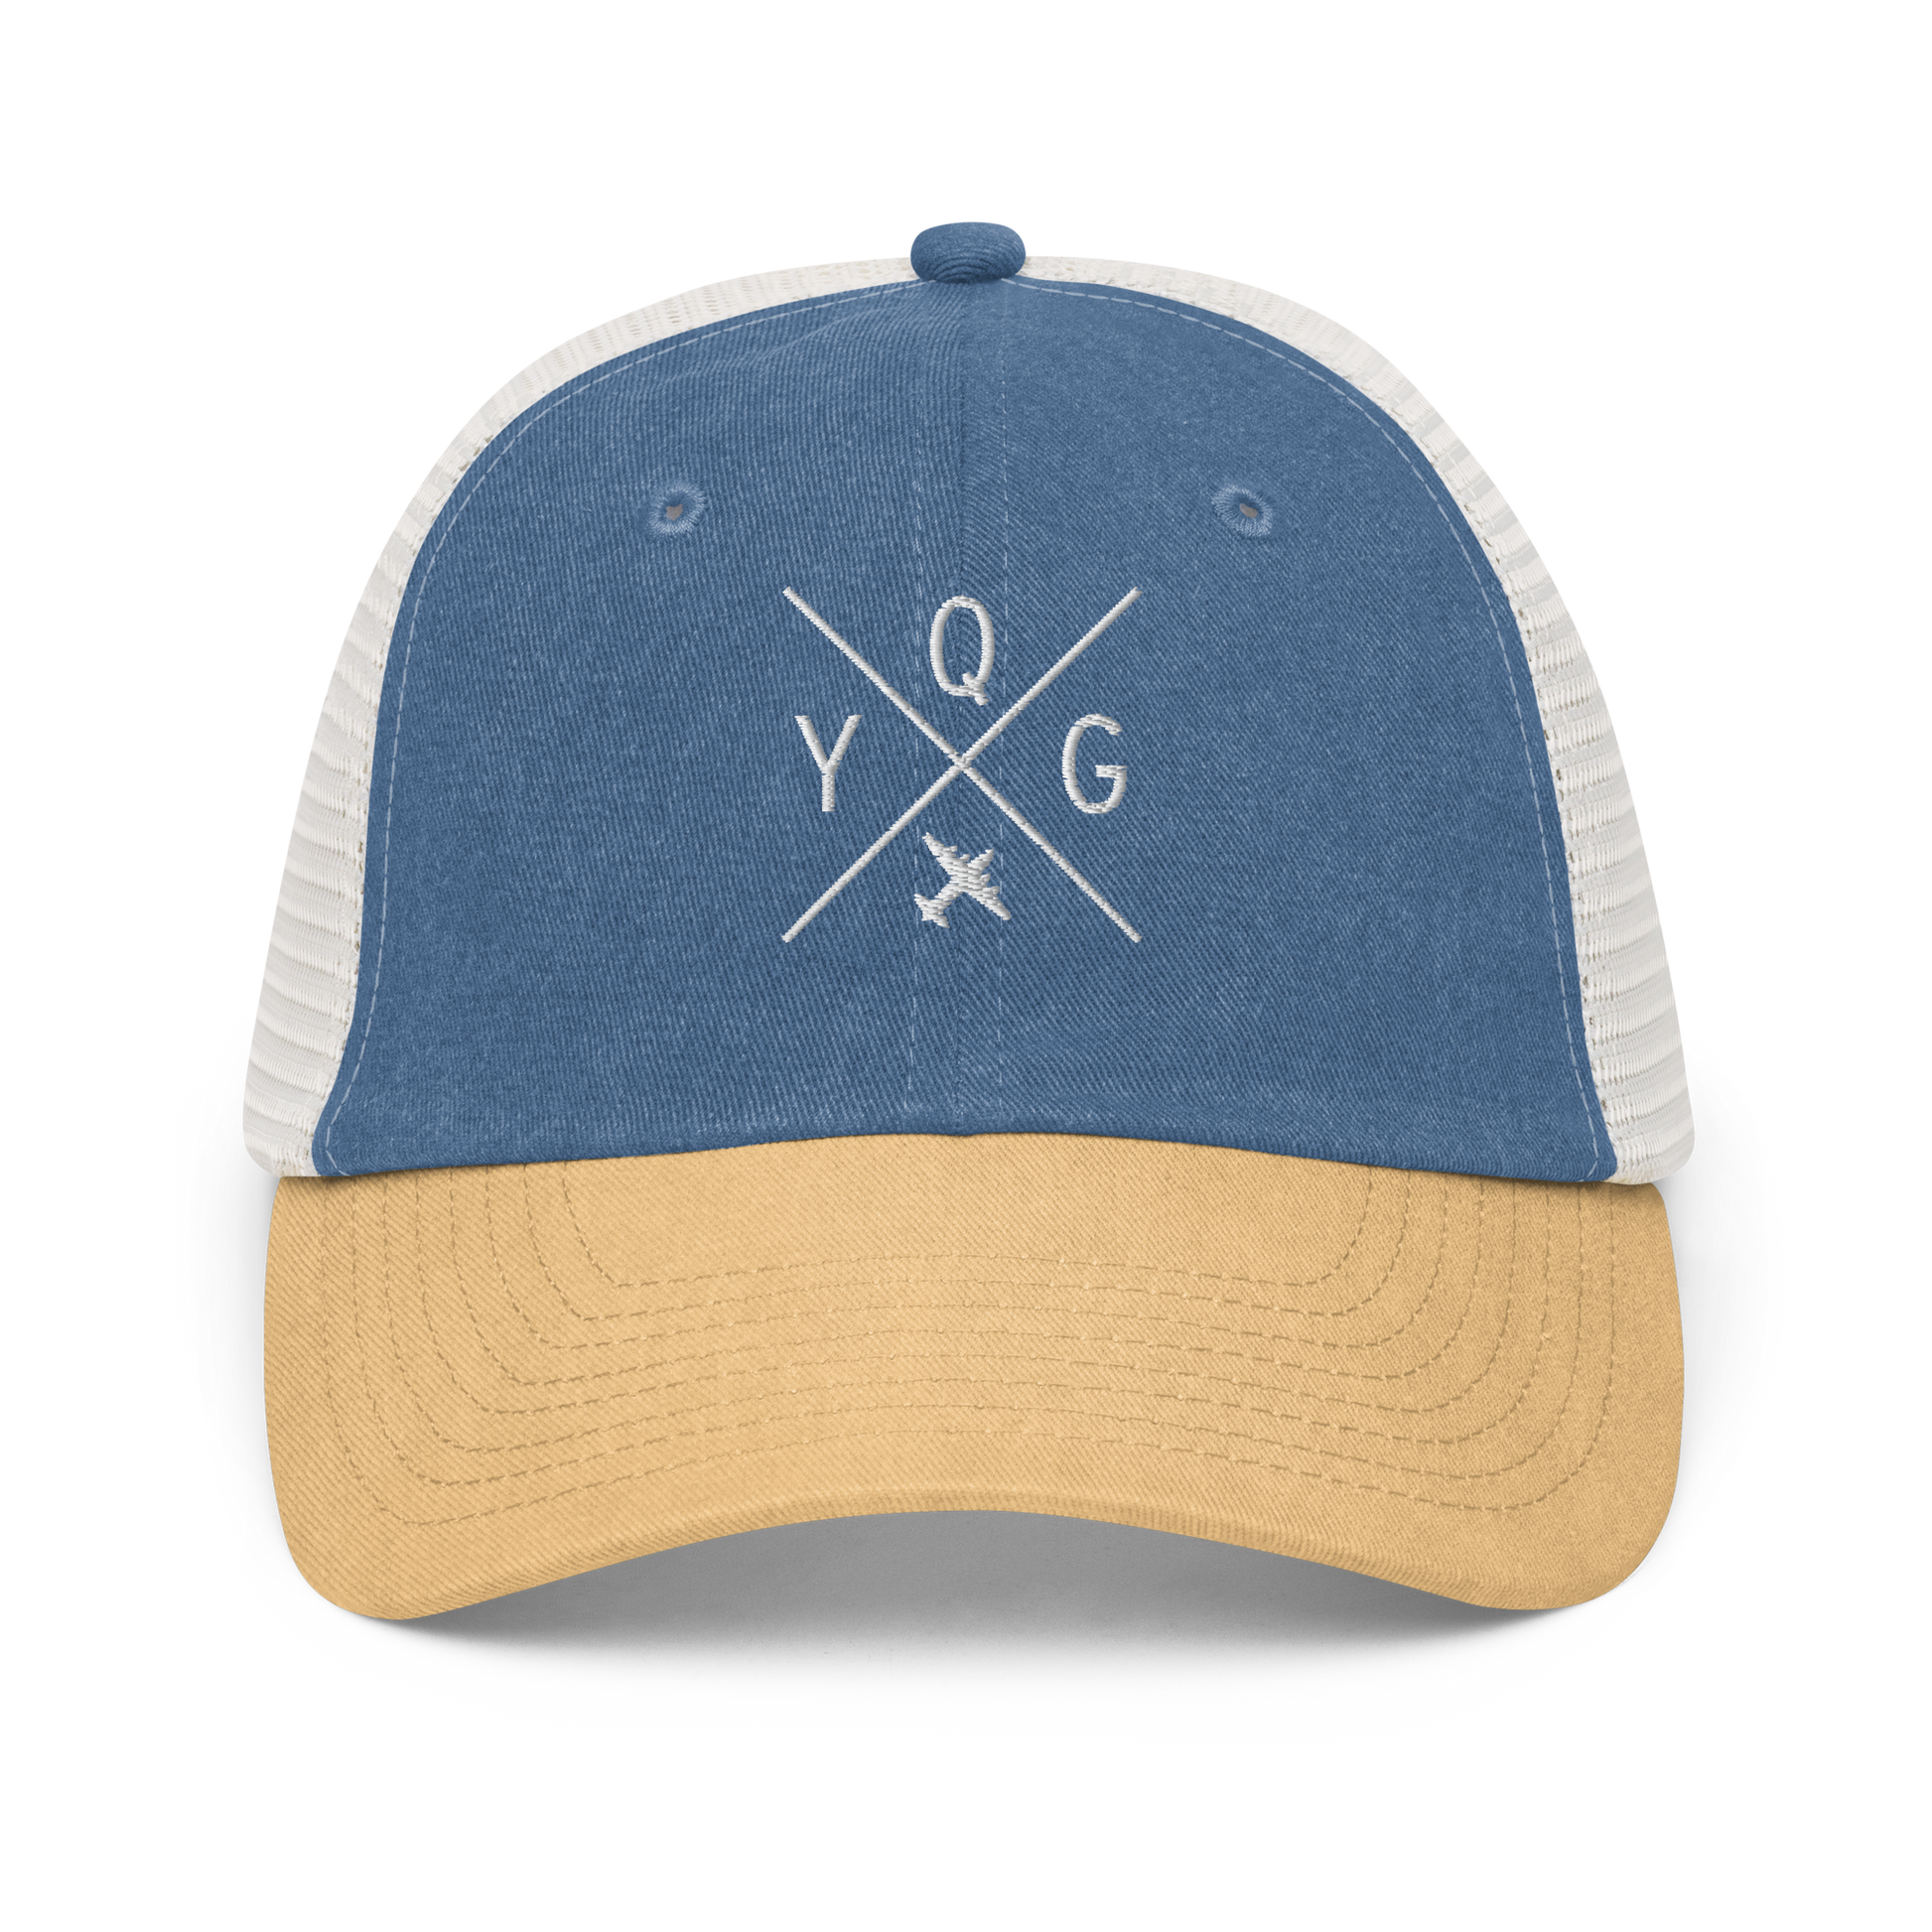 YHM Designs - YQG Windsor Pigment-Dyed Trucker Cap - Crossed-X Design with Airport Code and Vintage Propliner - White Embroidery - Image 01